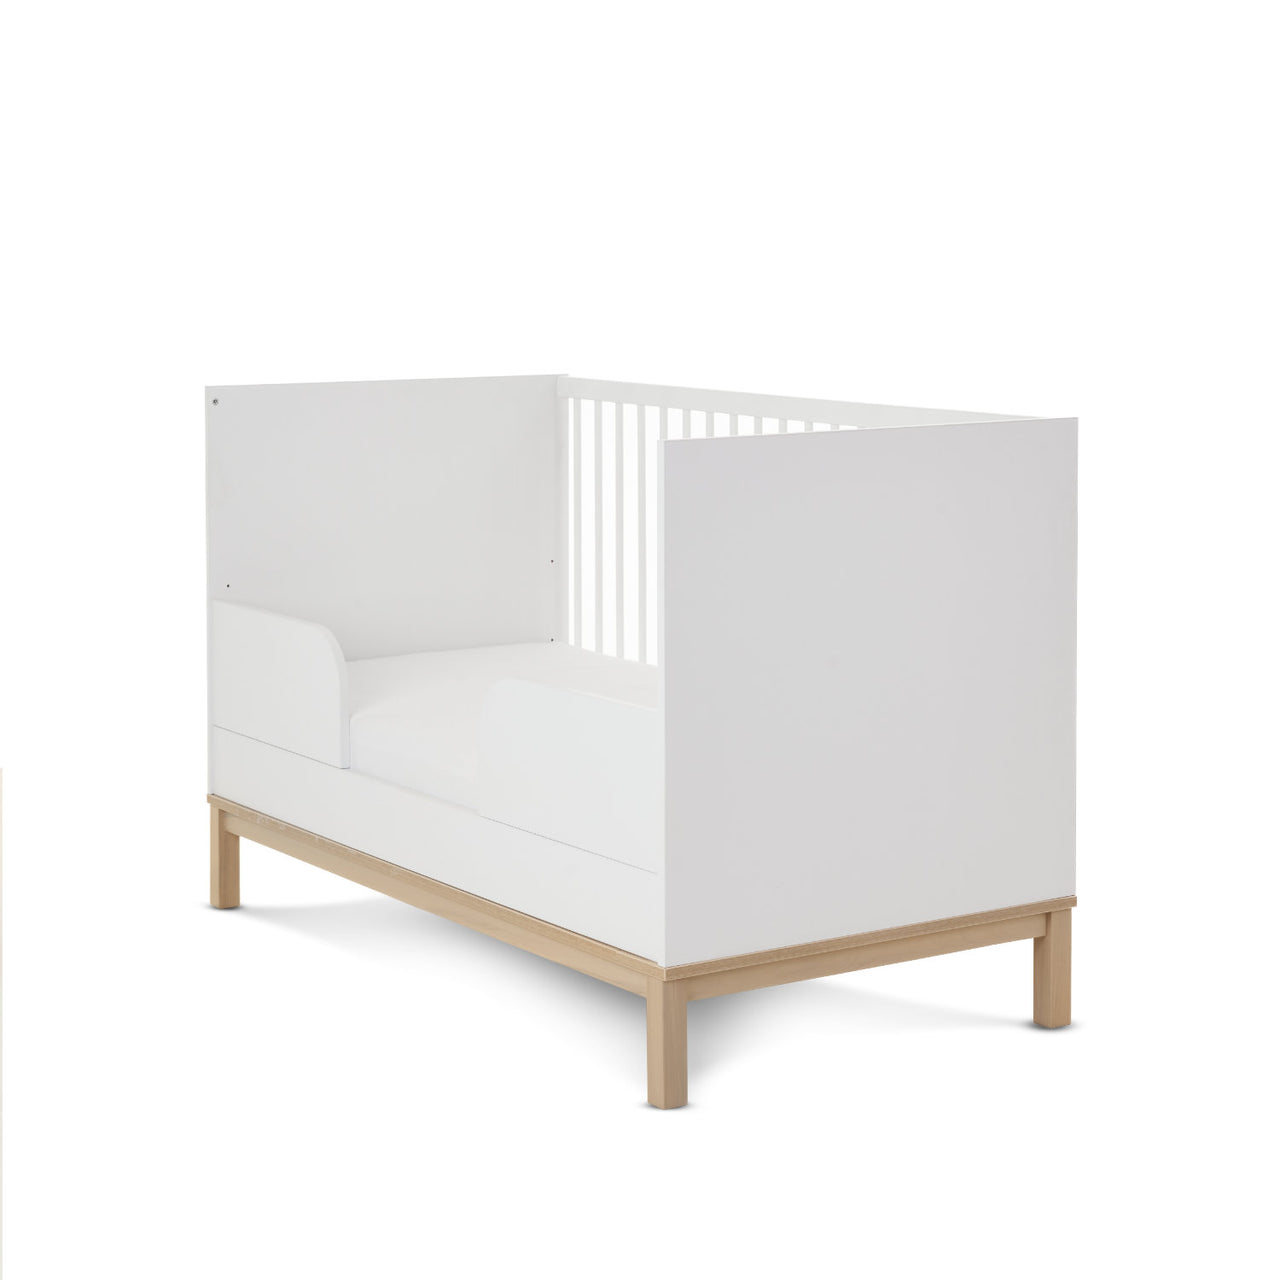 Astrid Cot Bed White